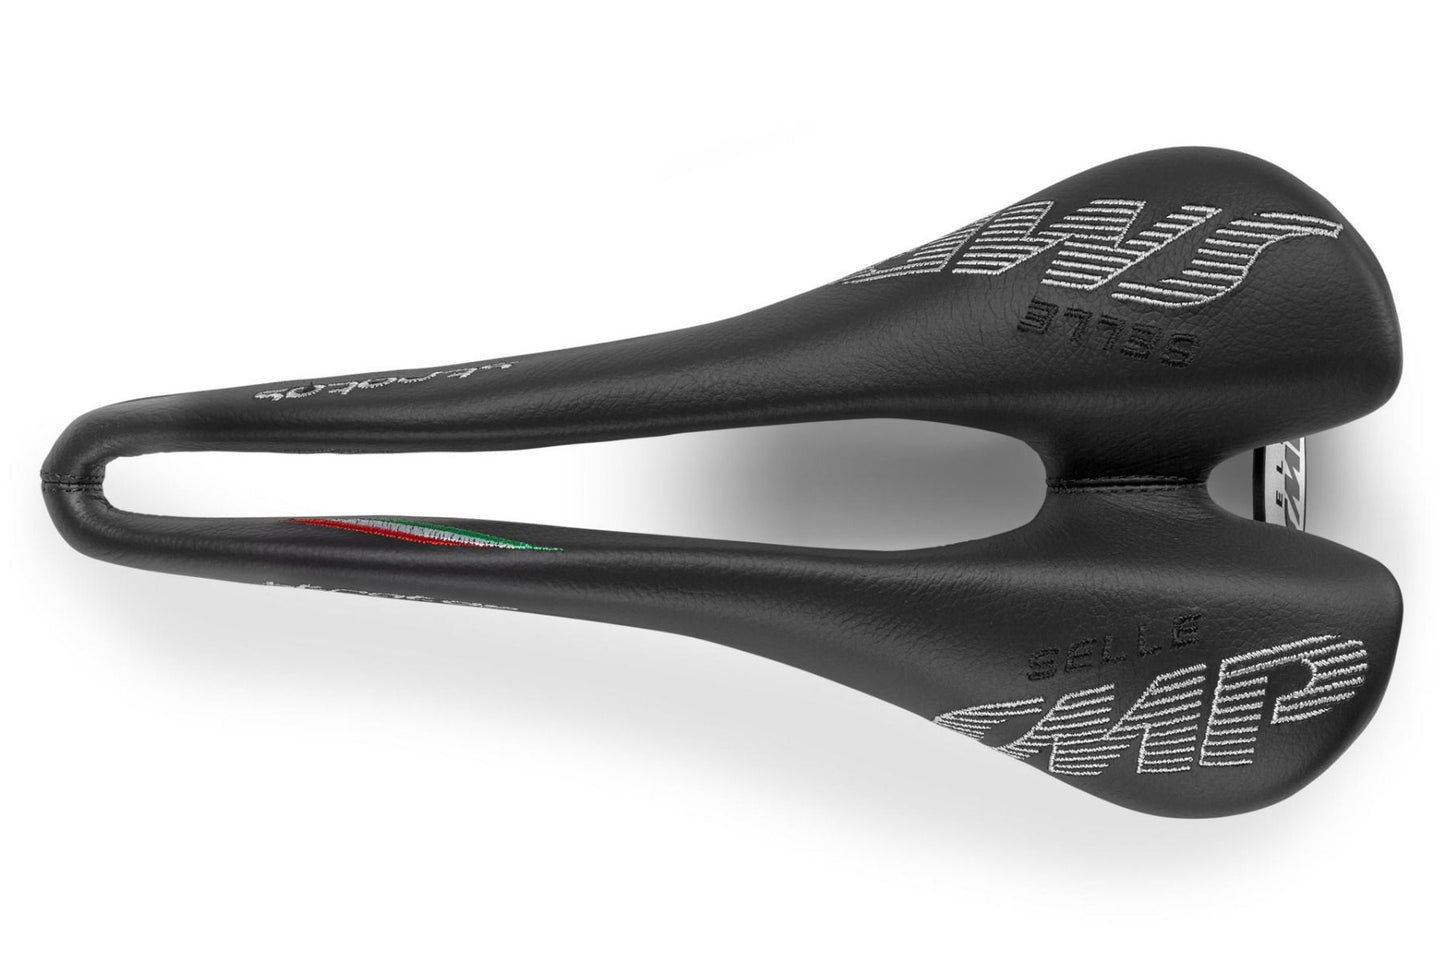 Selle SMP Stratos Saddle with Steel Rails (Black)